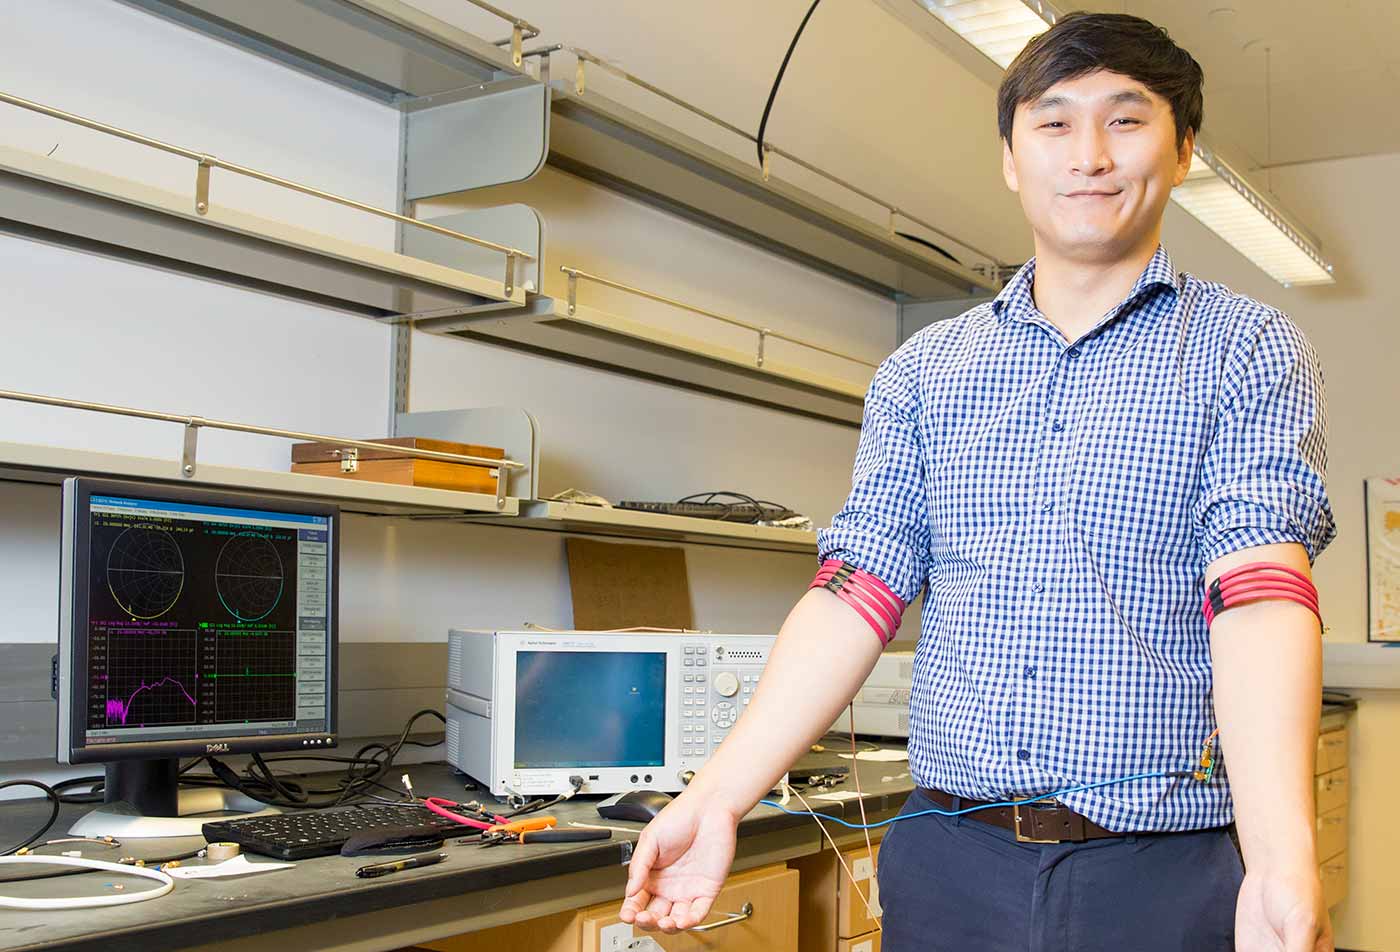 Image: Jiwoong Park, an electrical engineering Ph.D. student